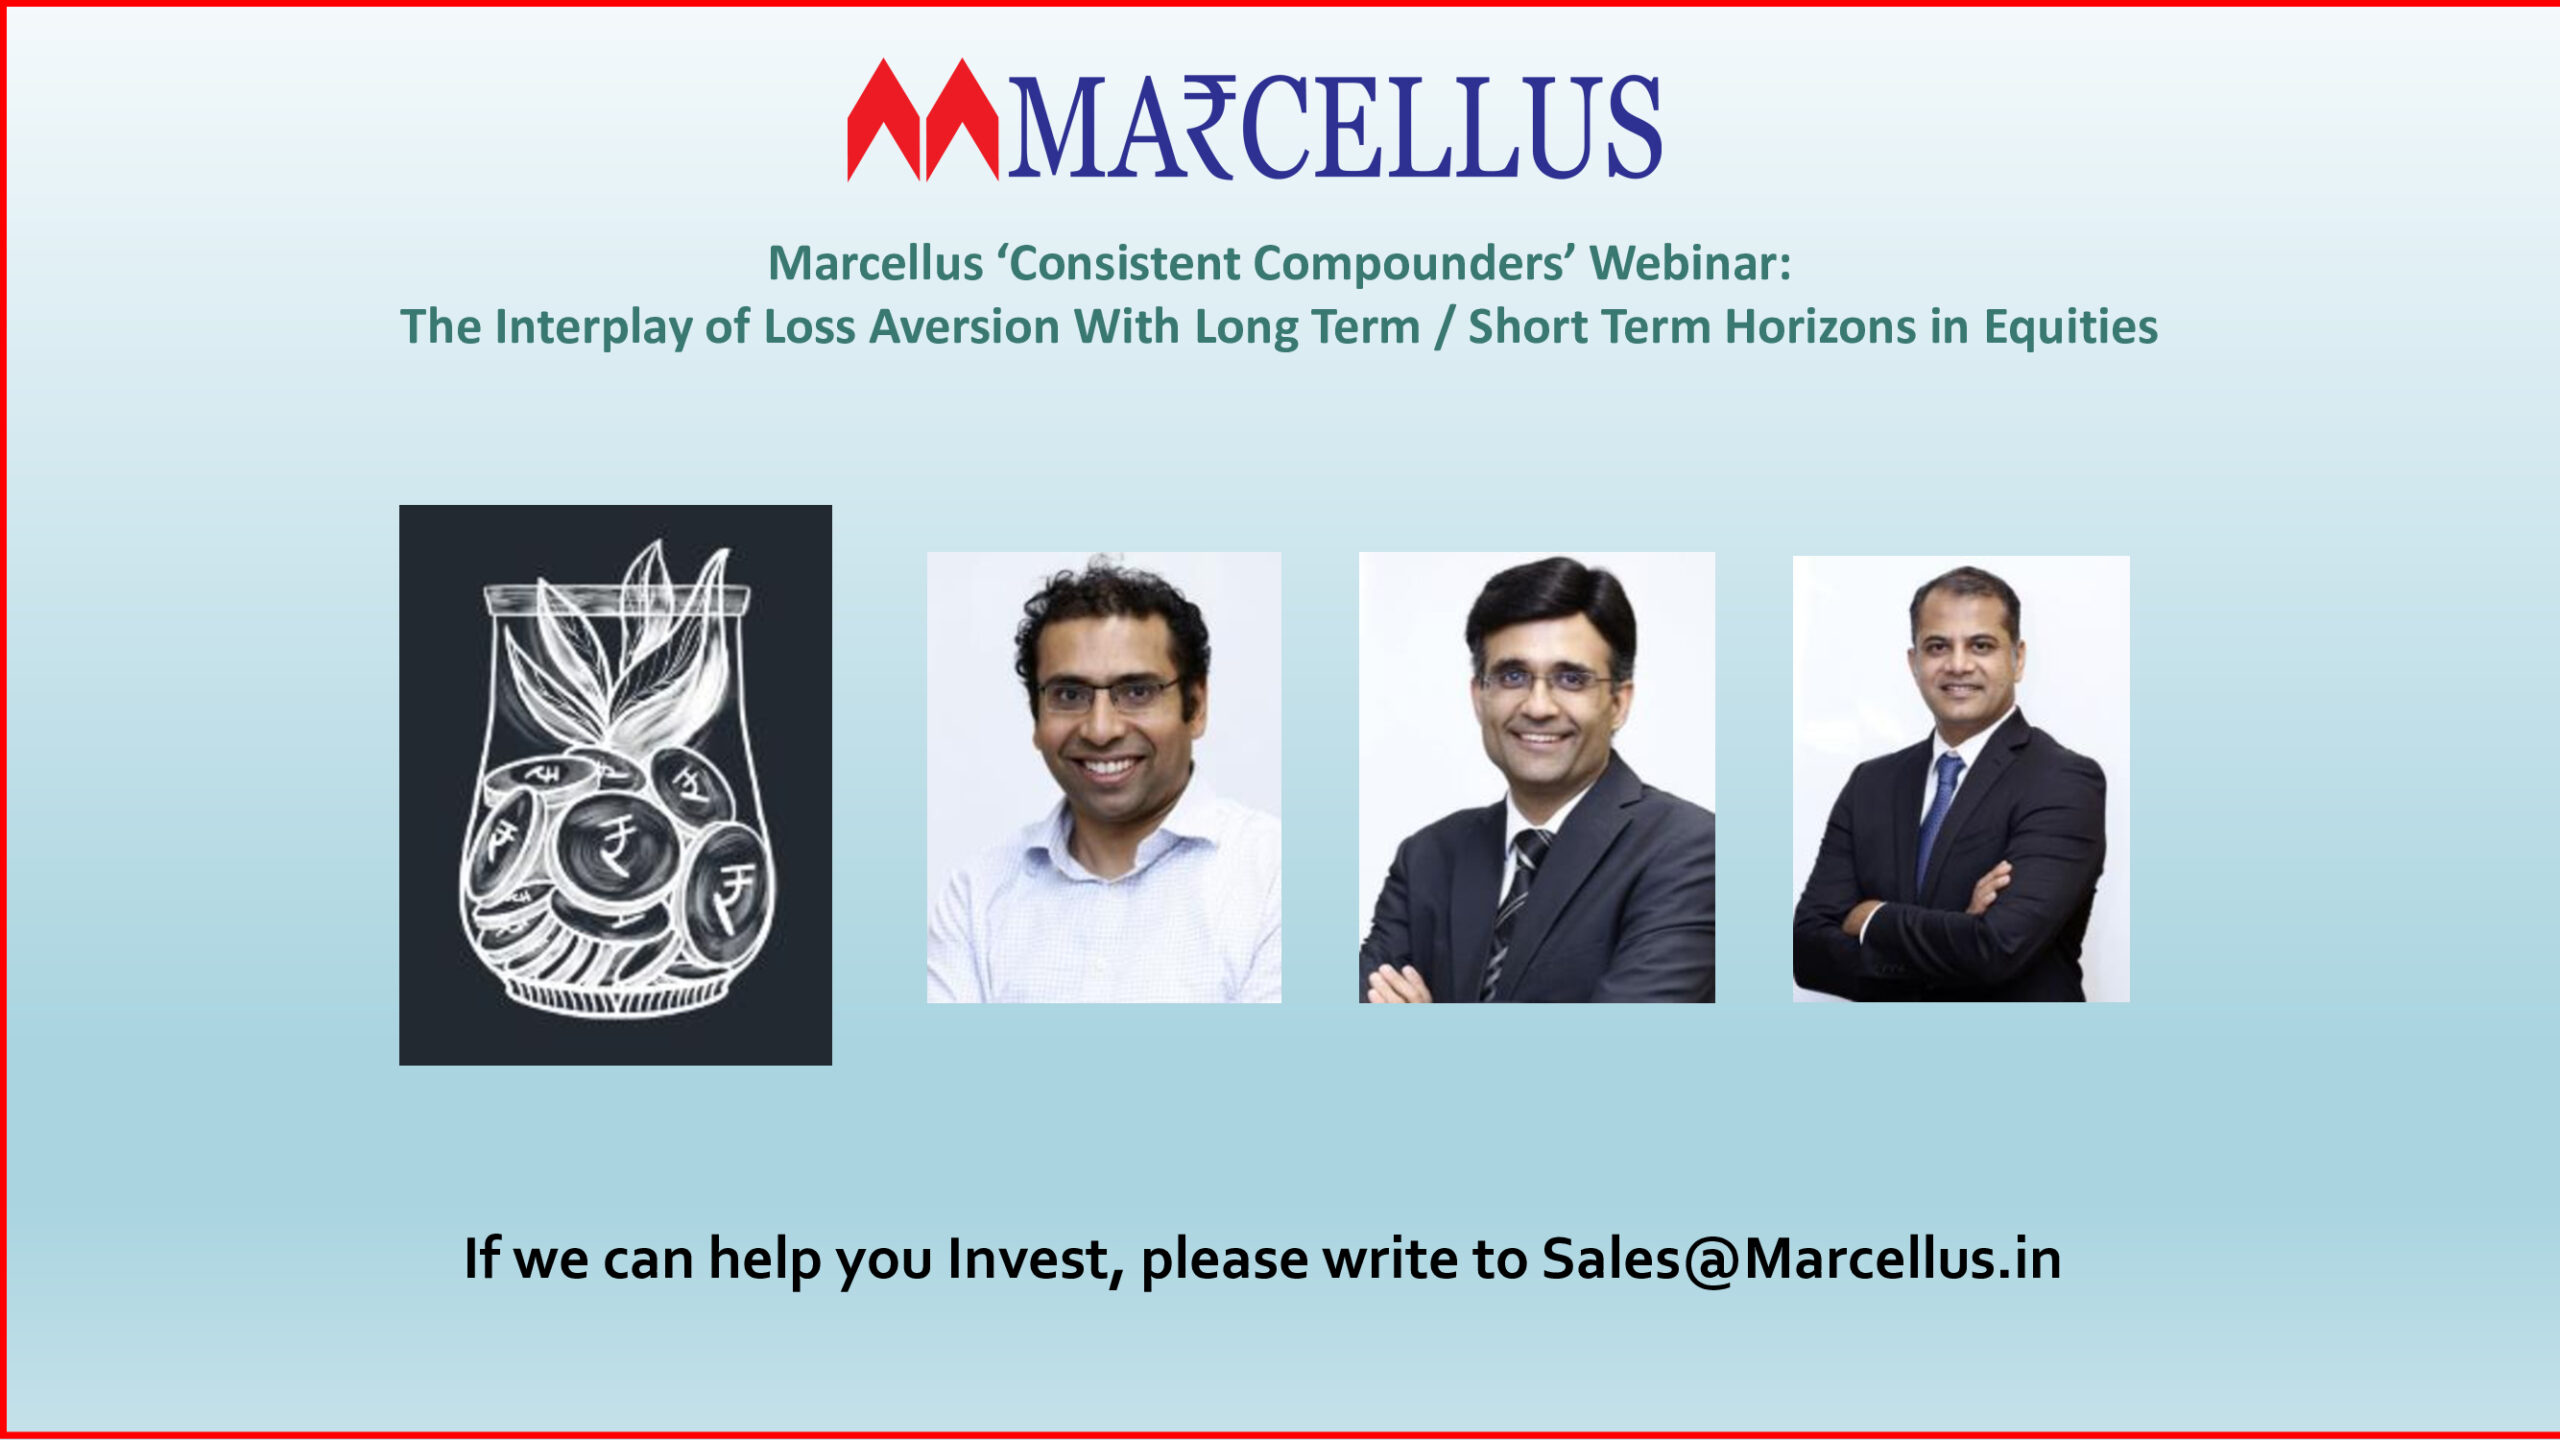 Marcellus Consistent Compounders Portfolio Webinar on The Interplay of Loss Aversion With Long Term / Short Term Horizons in Equities.